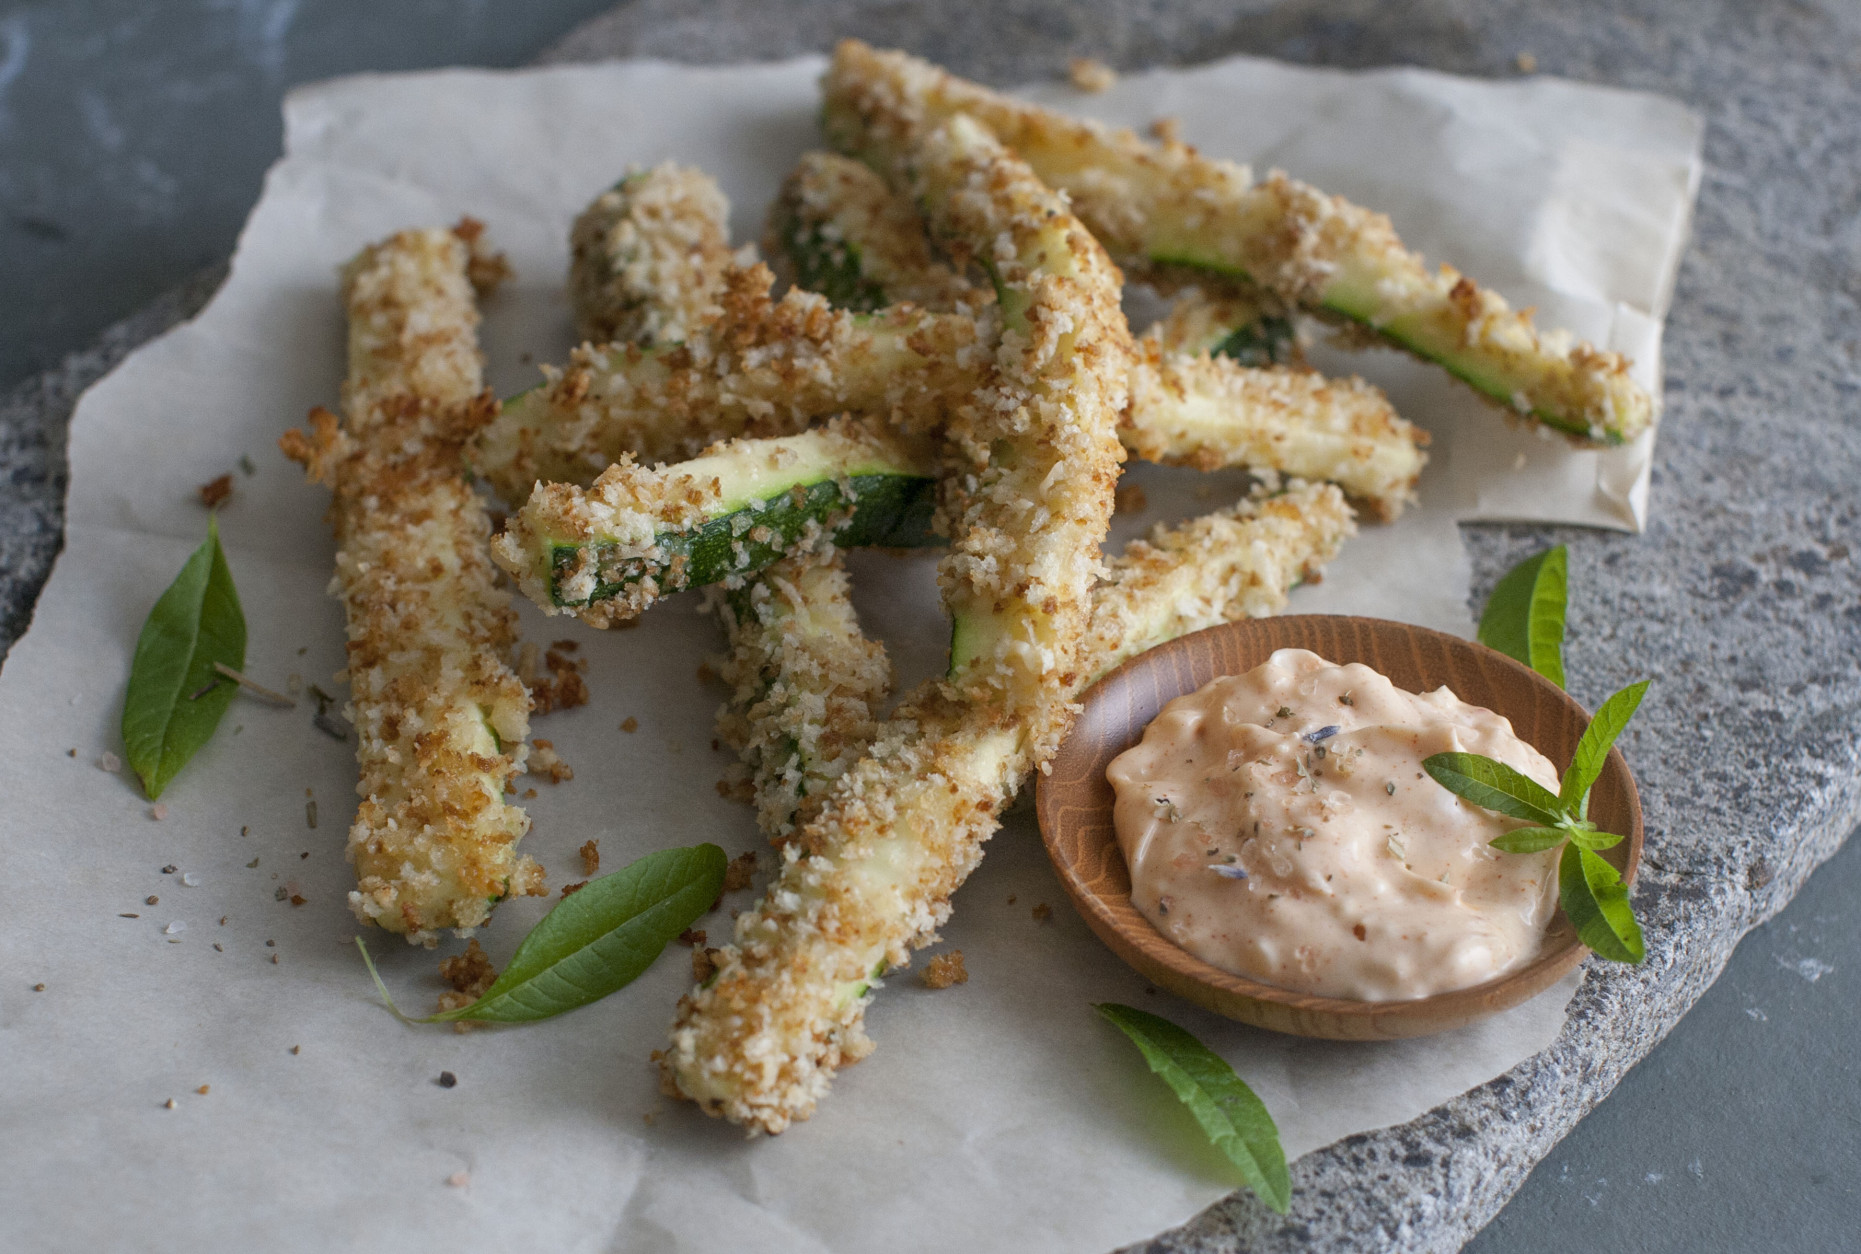 This June 30, 2014 photo shows cheesy zucchini fries with peprika dipping sauce in Concord, N.H. Cutting a zucchini into fry-like sticks, then cooking them delivers that signature crunch without the deep-frying. (AP Photo/Matthew Mead)